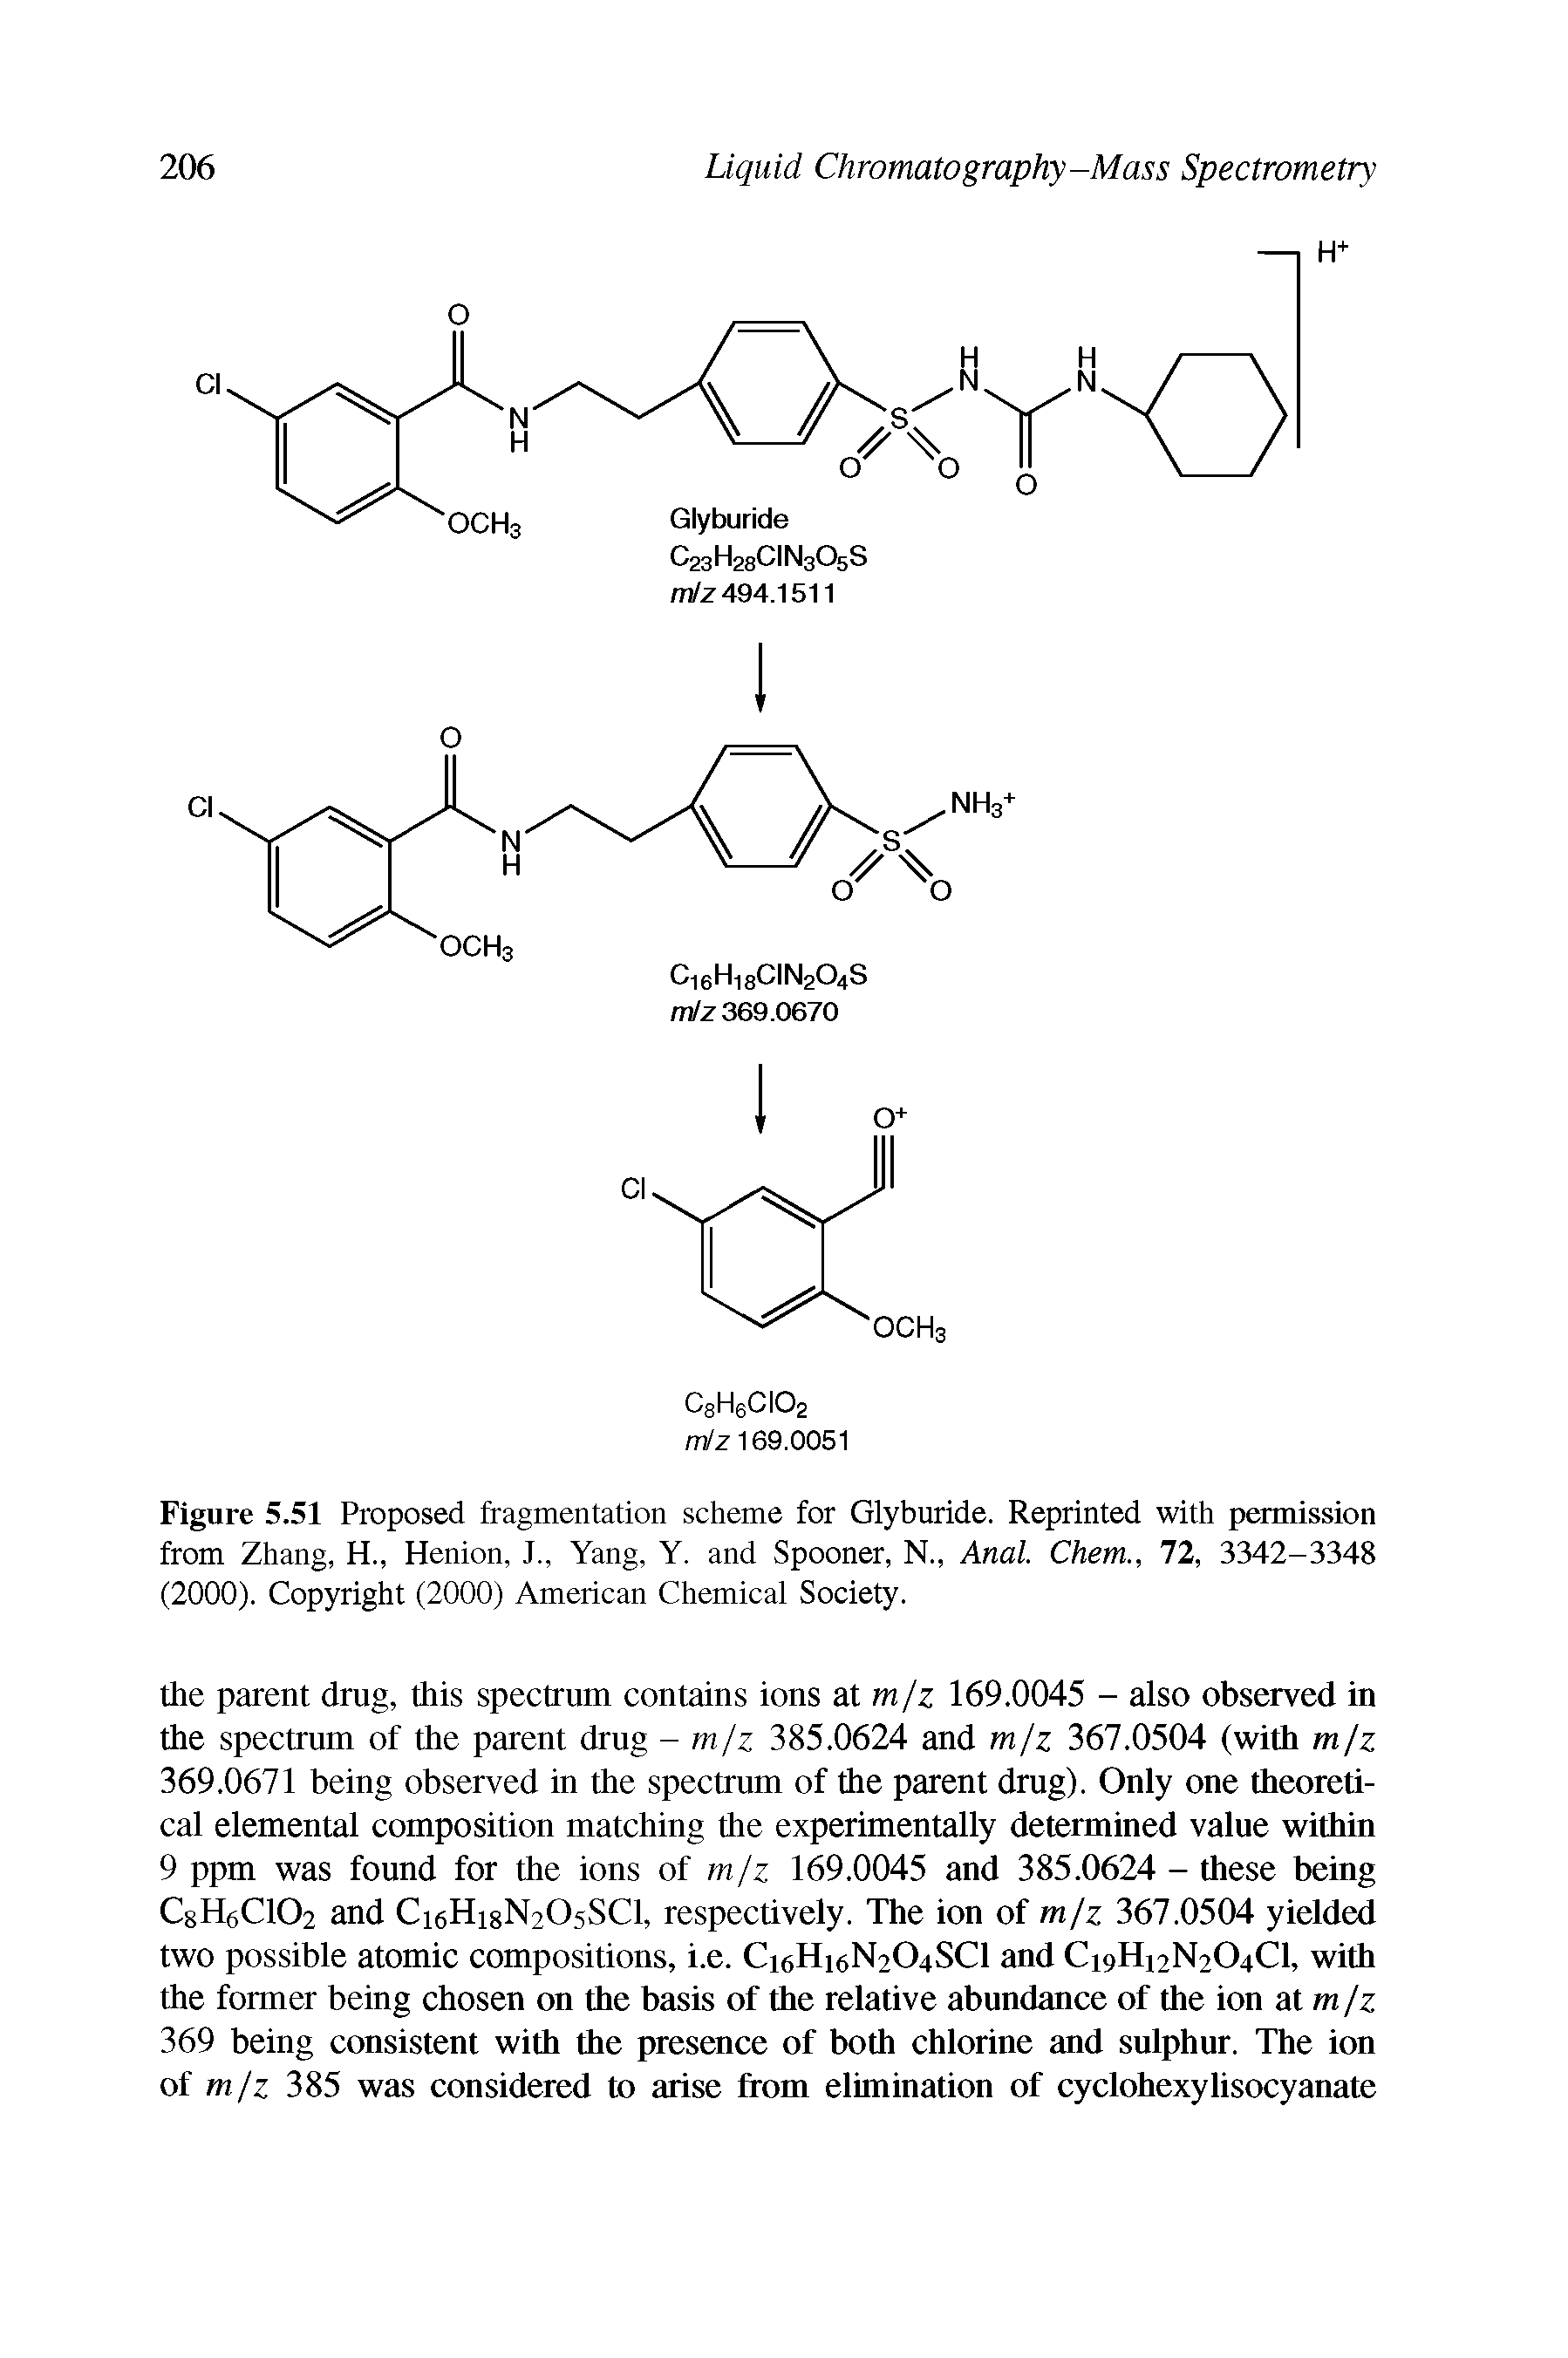 Figure 5.51 Proposed fragmentation scheme for Glyburide. Reprinted with permission from Zhang, H., Henion, J., Yang, Y. and Spooner, N., Anal. Chem., 72, 3342-3348 (2000). Copyright (2000) American Chemical Society.